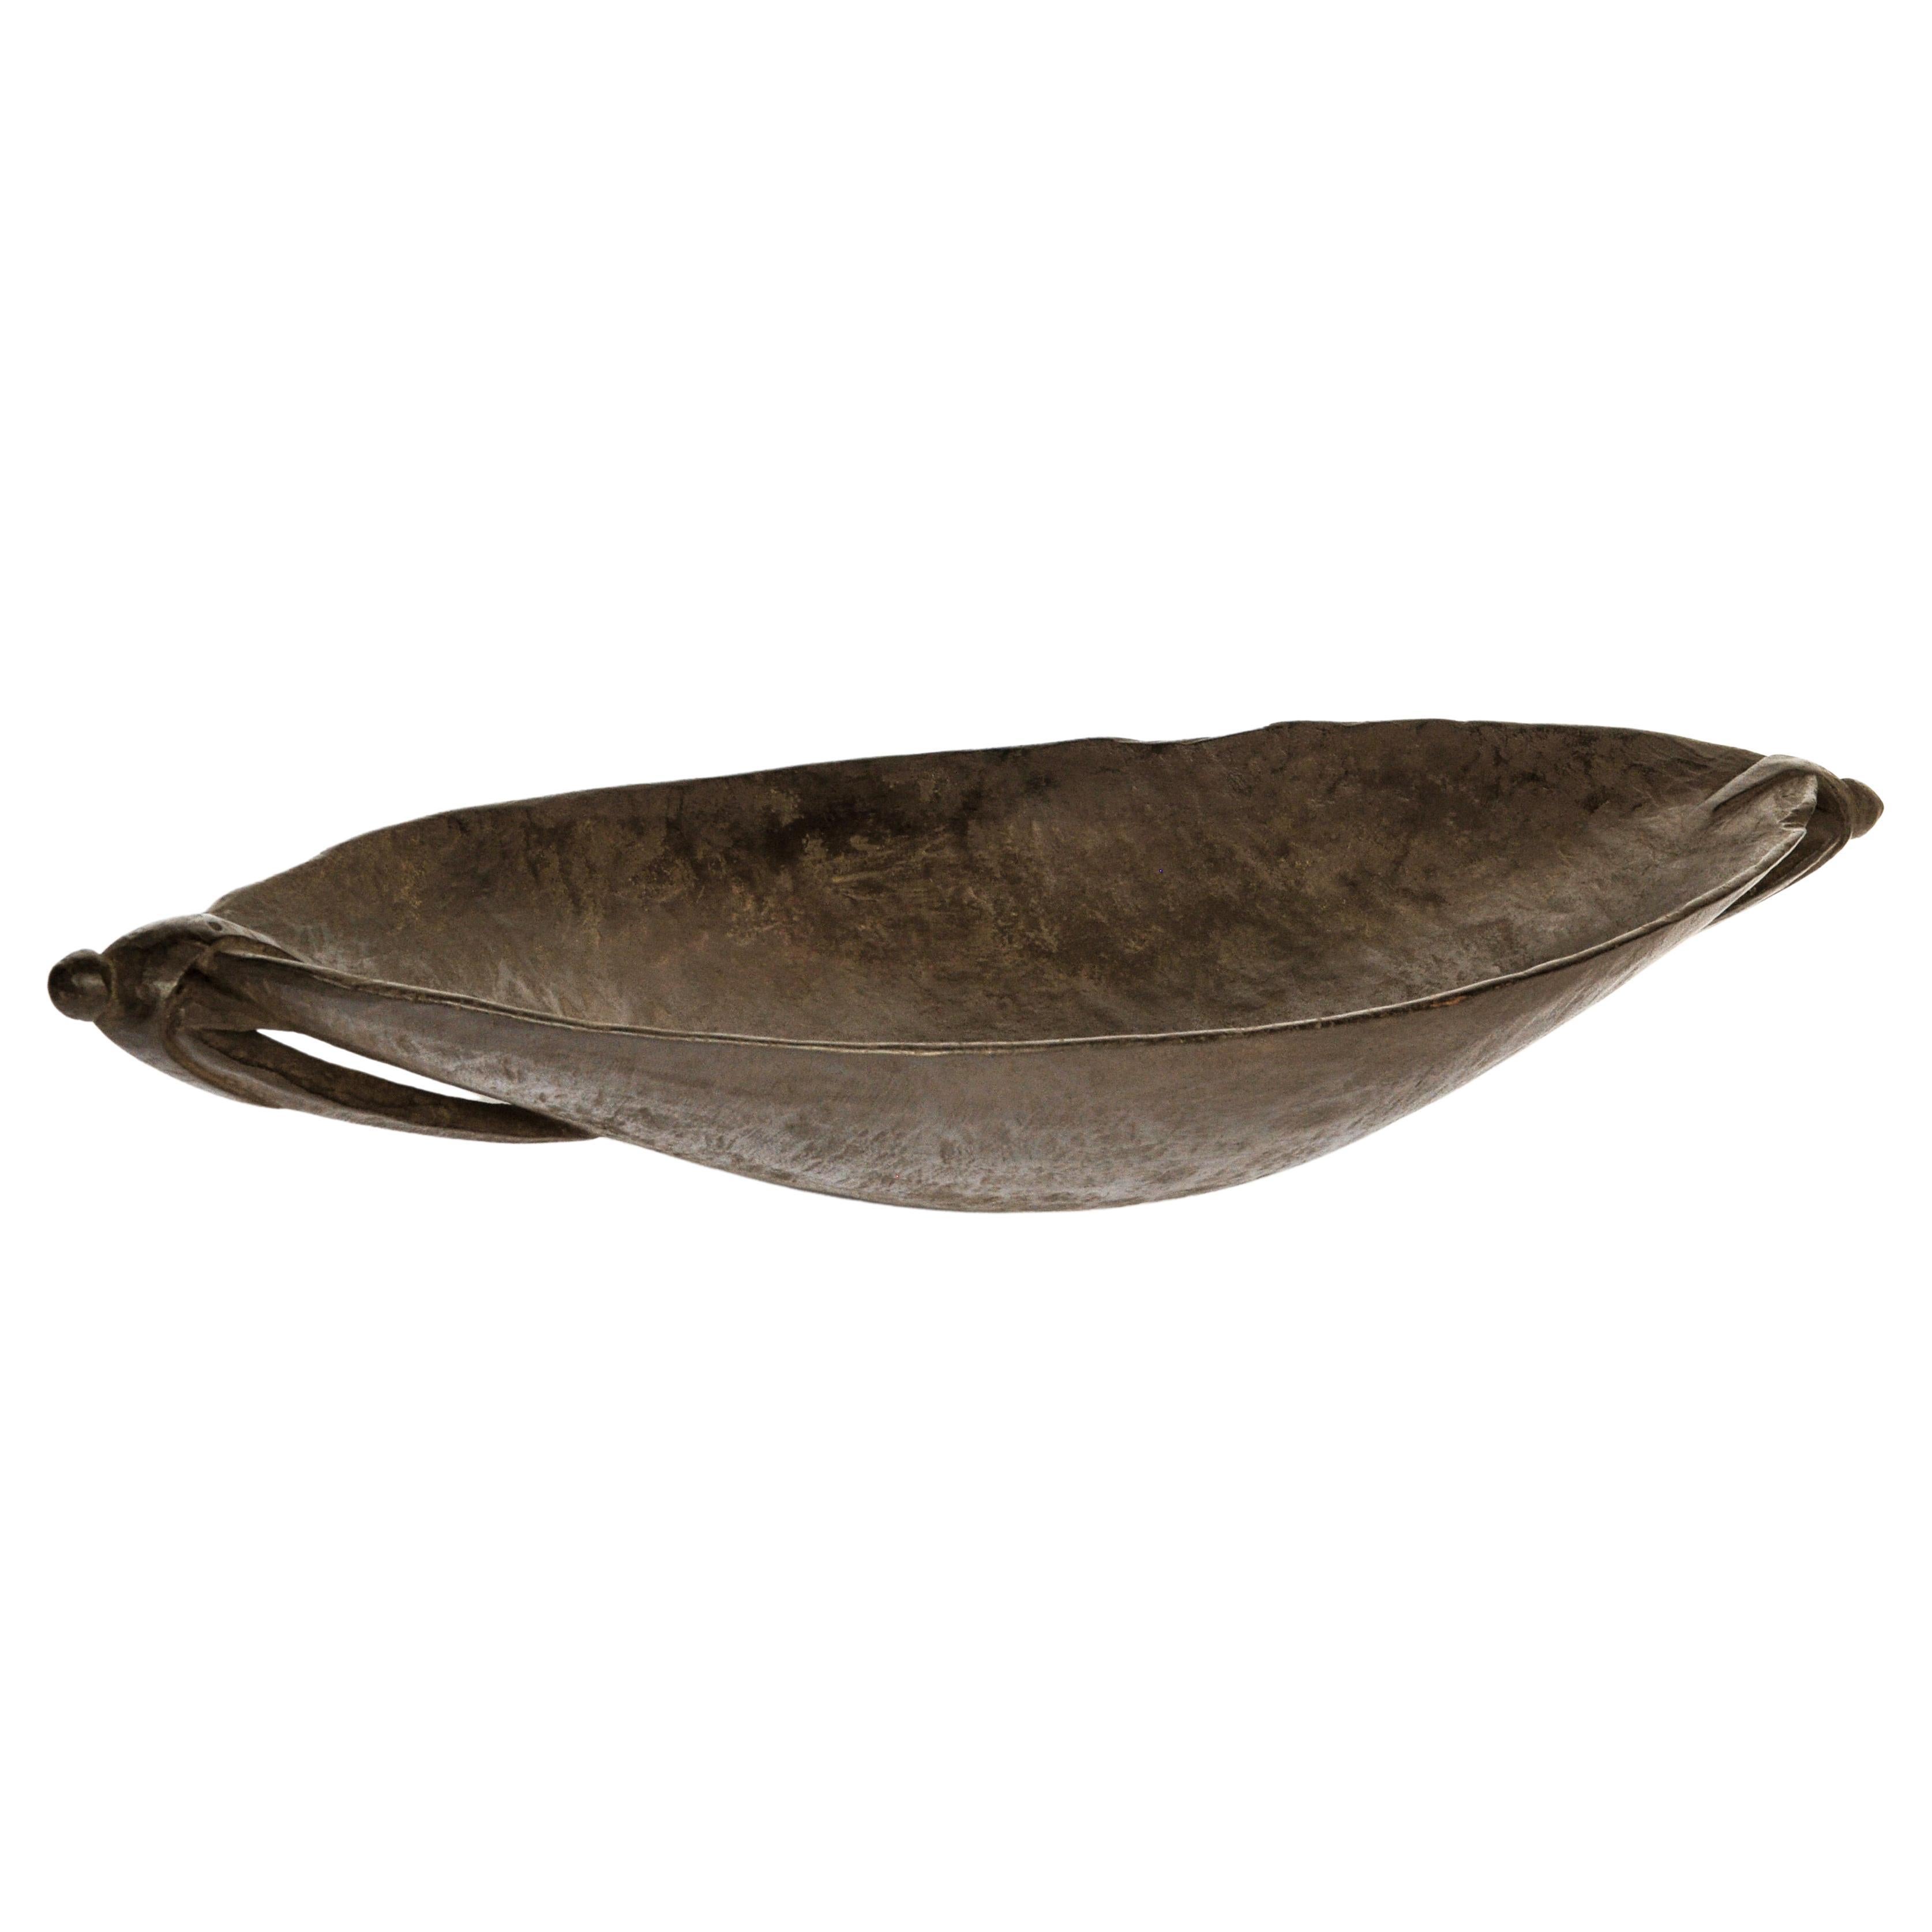 Old Tribal Wooden bowl, Siassi Island Papua New Guinea, Mid-20th Century
Hewn and shaped by hand using basic instruments from a single piece of a very dense local hardwood. It exhibits a graceful shape and a lovely patina, and would have been used